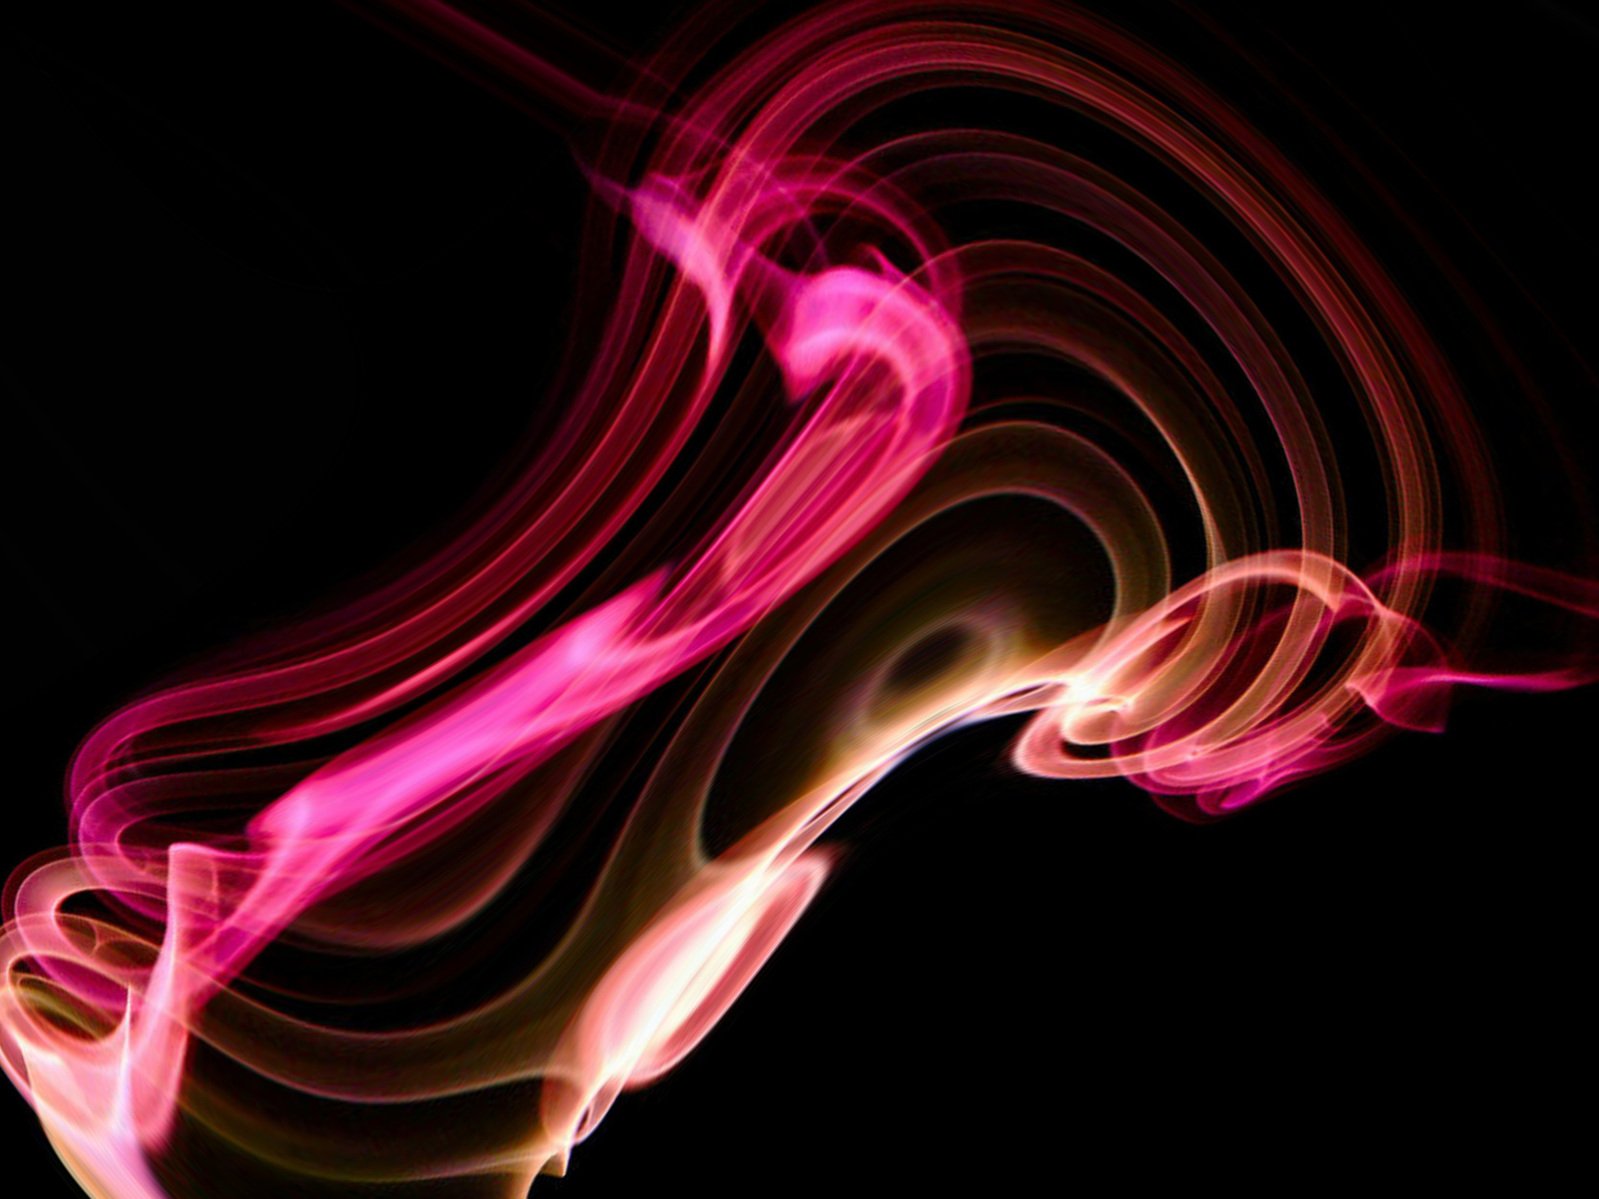 a pink swirl on a black background